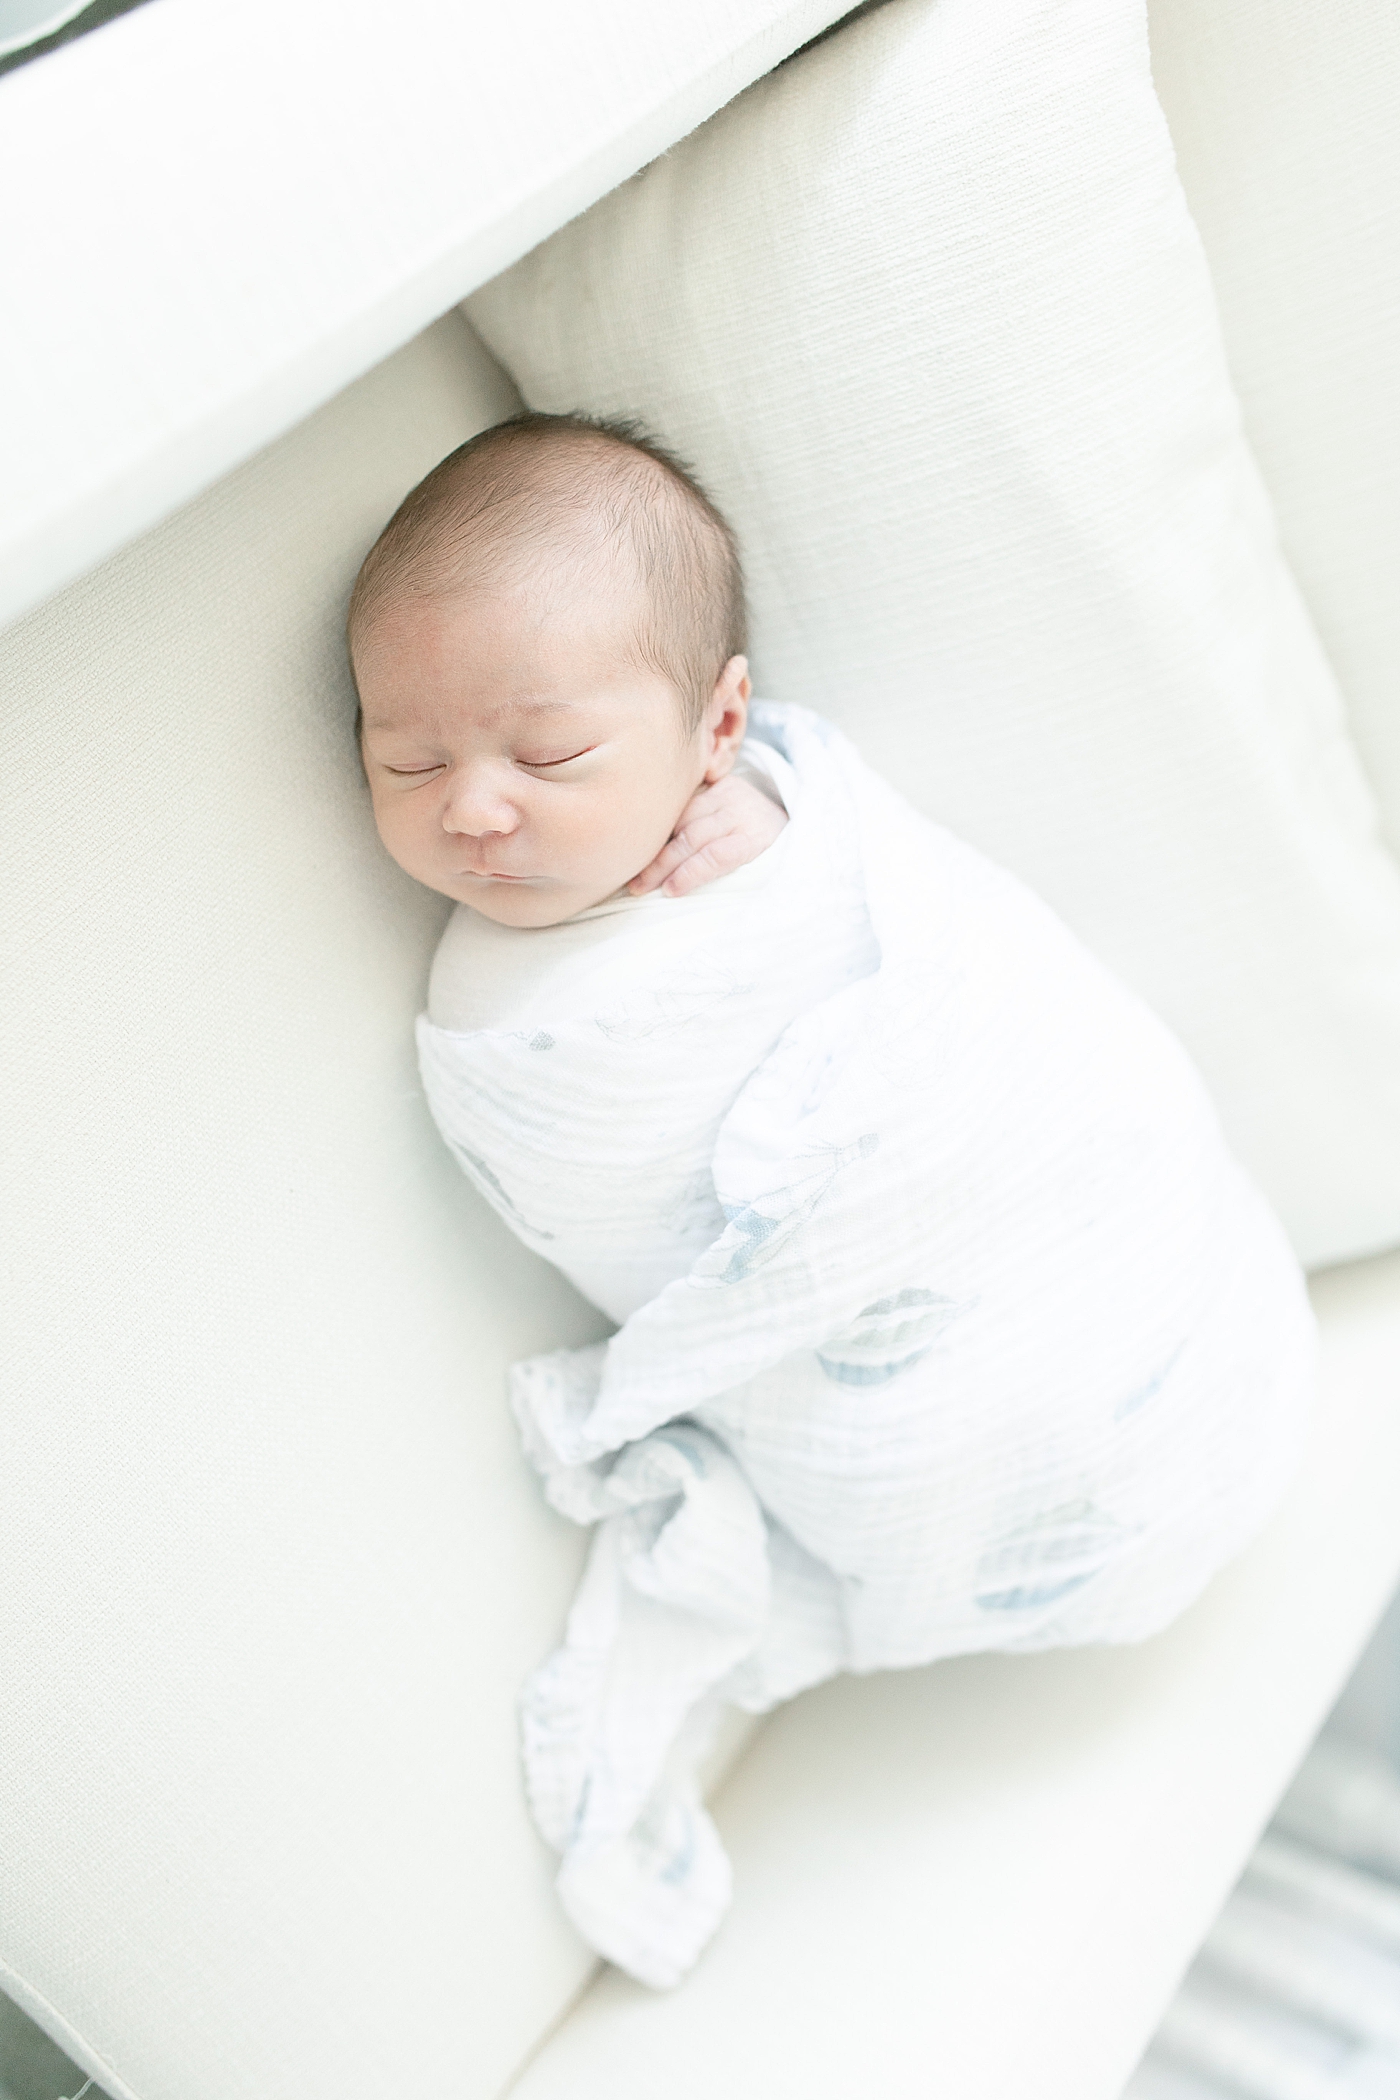 Newborn baby wrapped in muslin swaddle asleep | Photo by Little Sunshine Photography